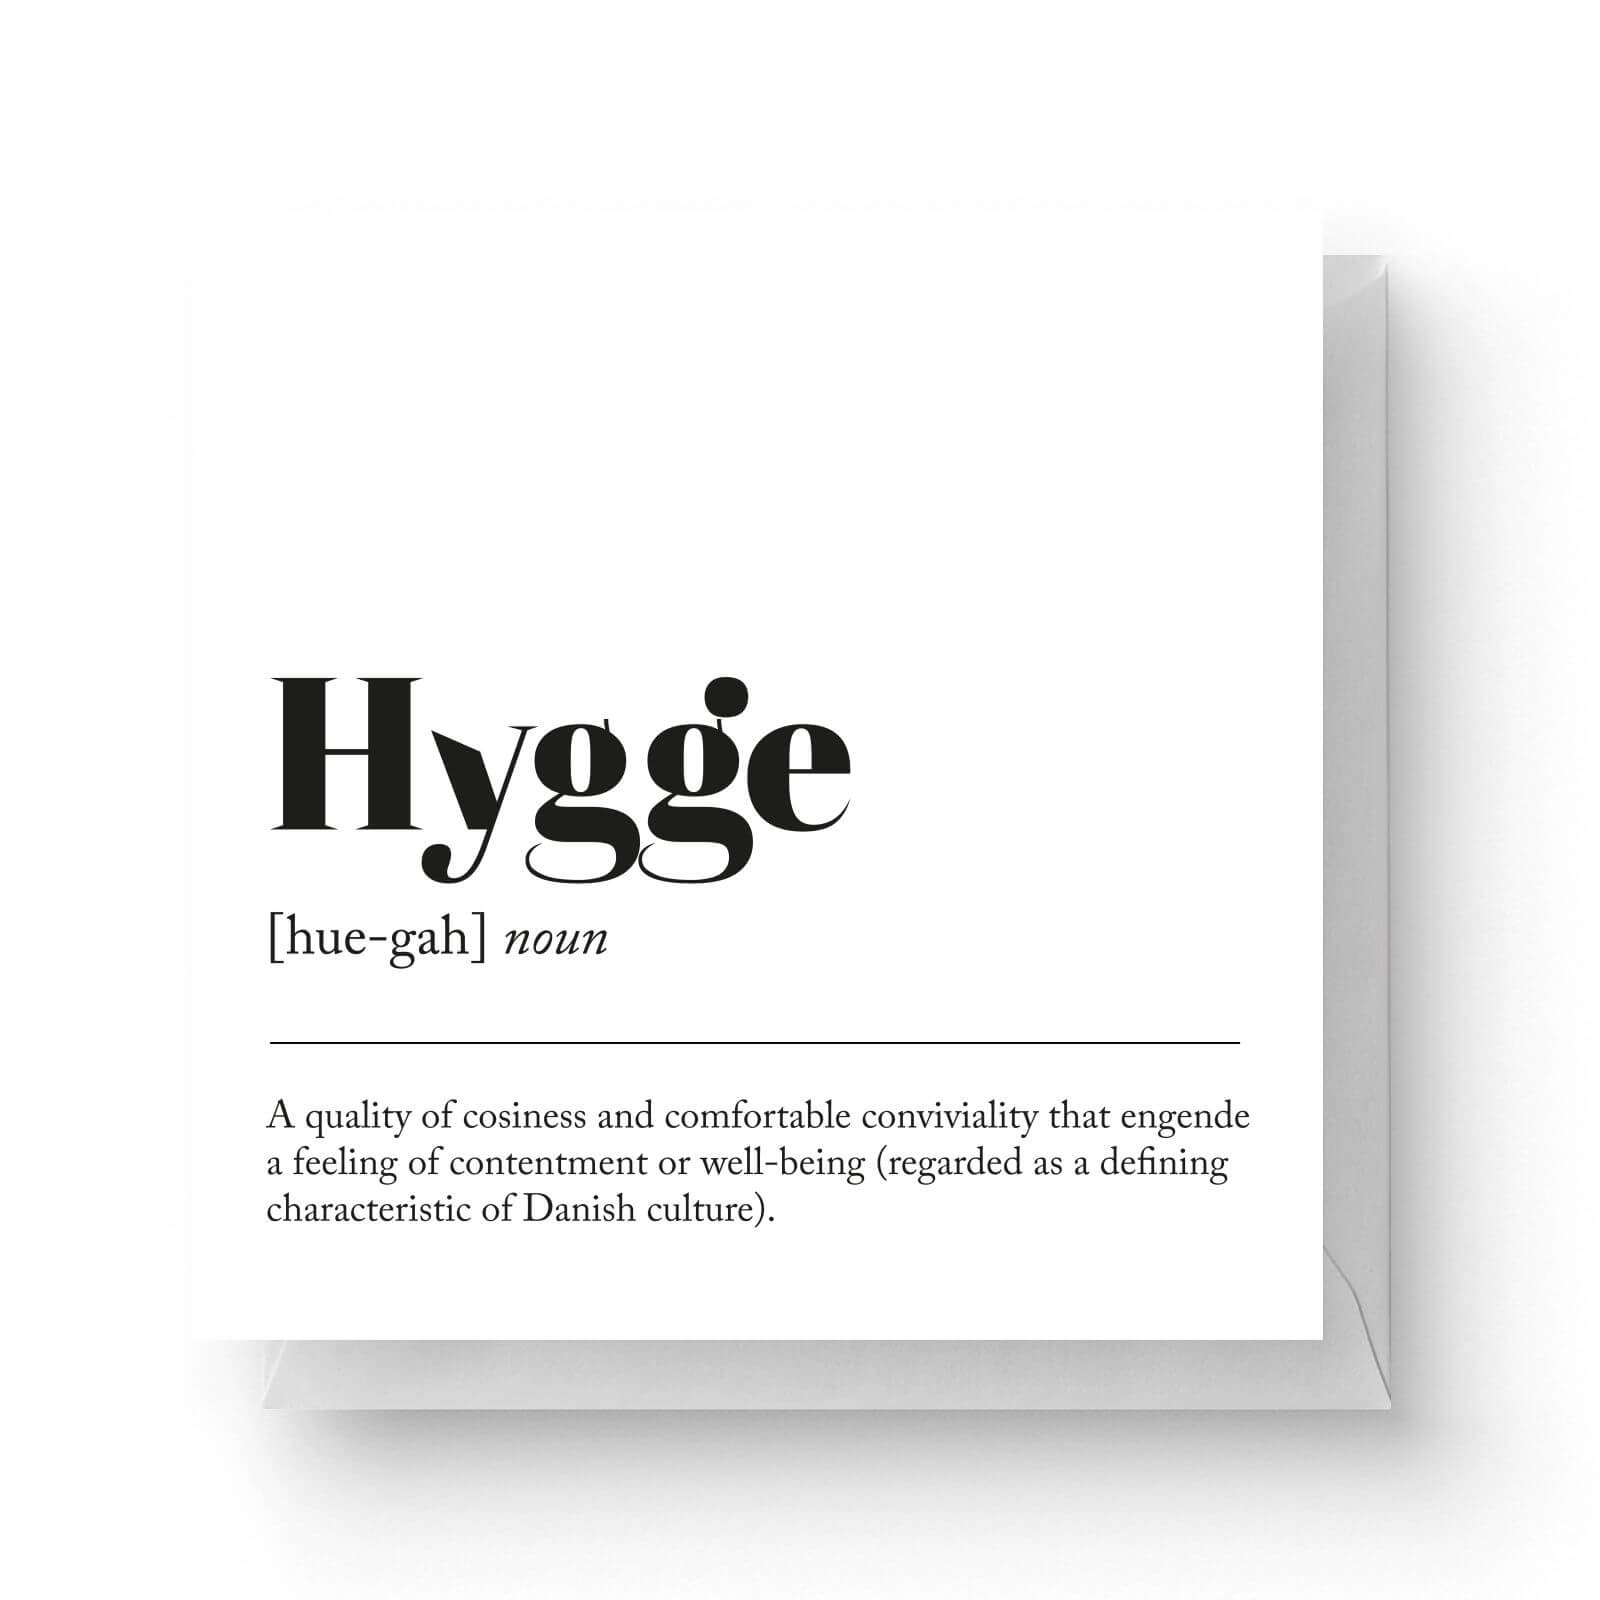 Hygge Definition Square Greetings Card